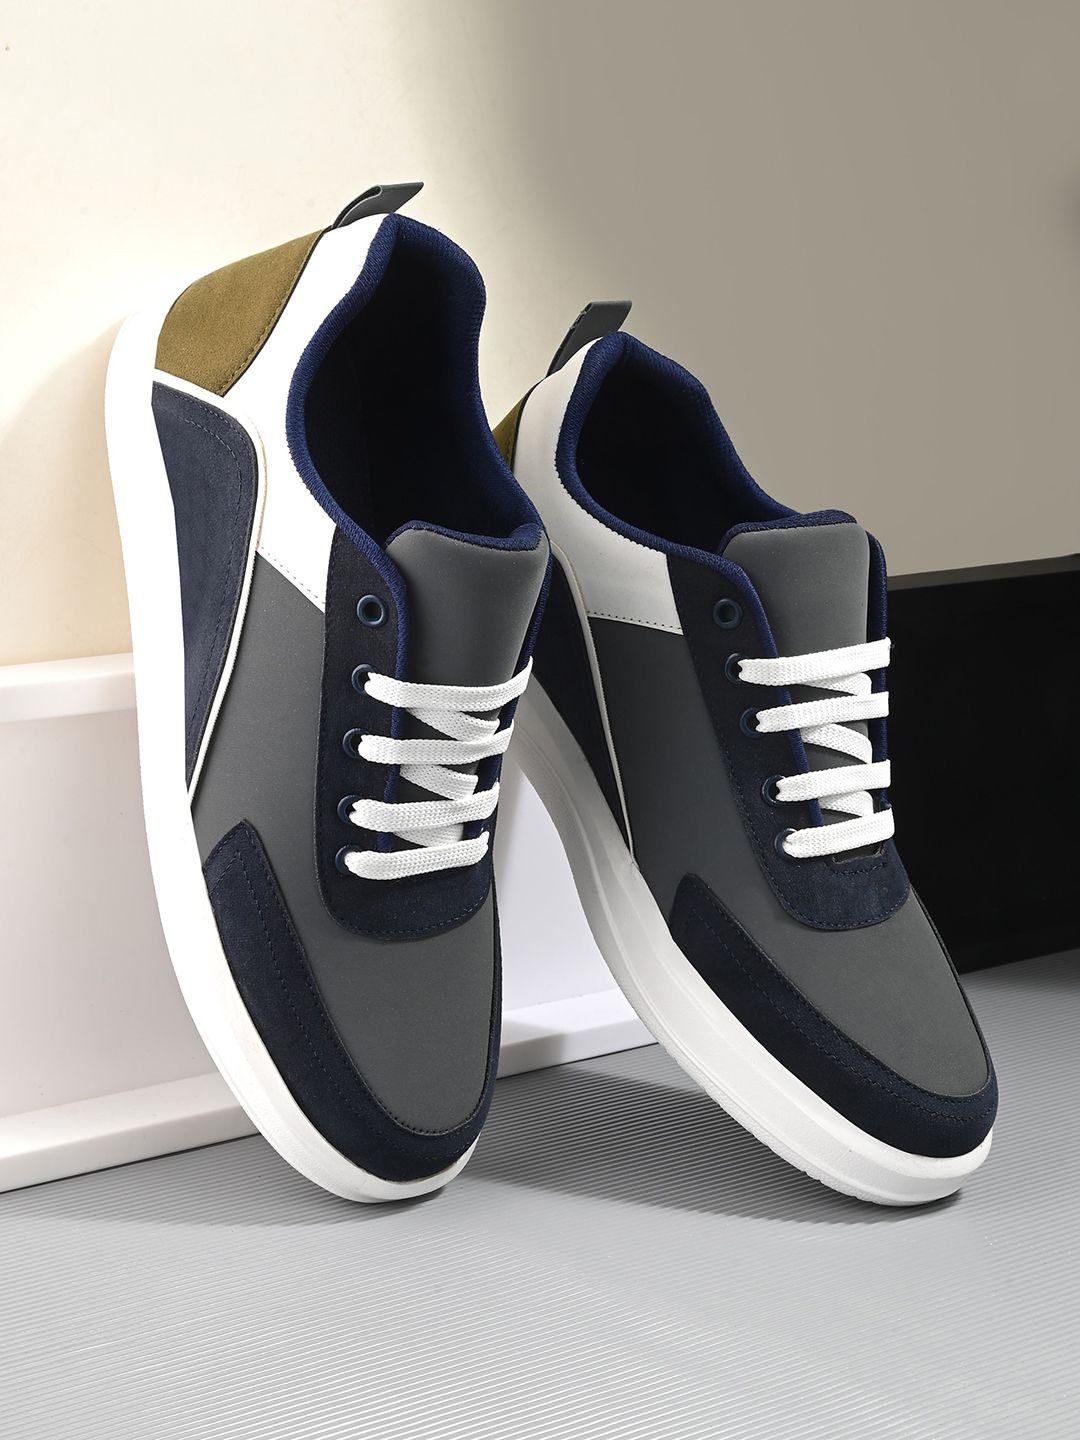 the-roadster-lifestyle-co.-men-grey-&-navy-blue-colourblocked-lightweight-sneakers